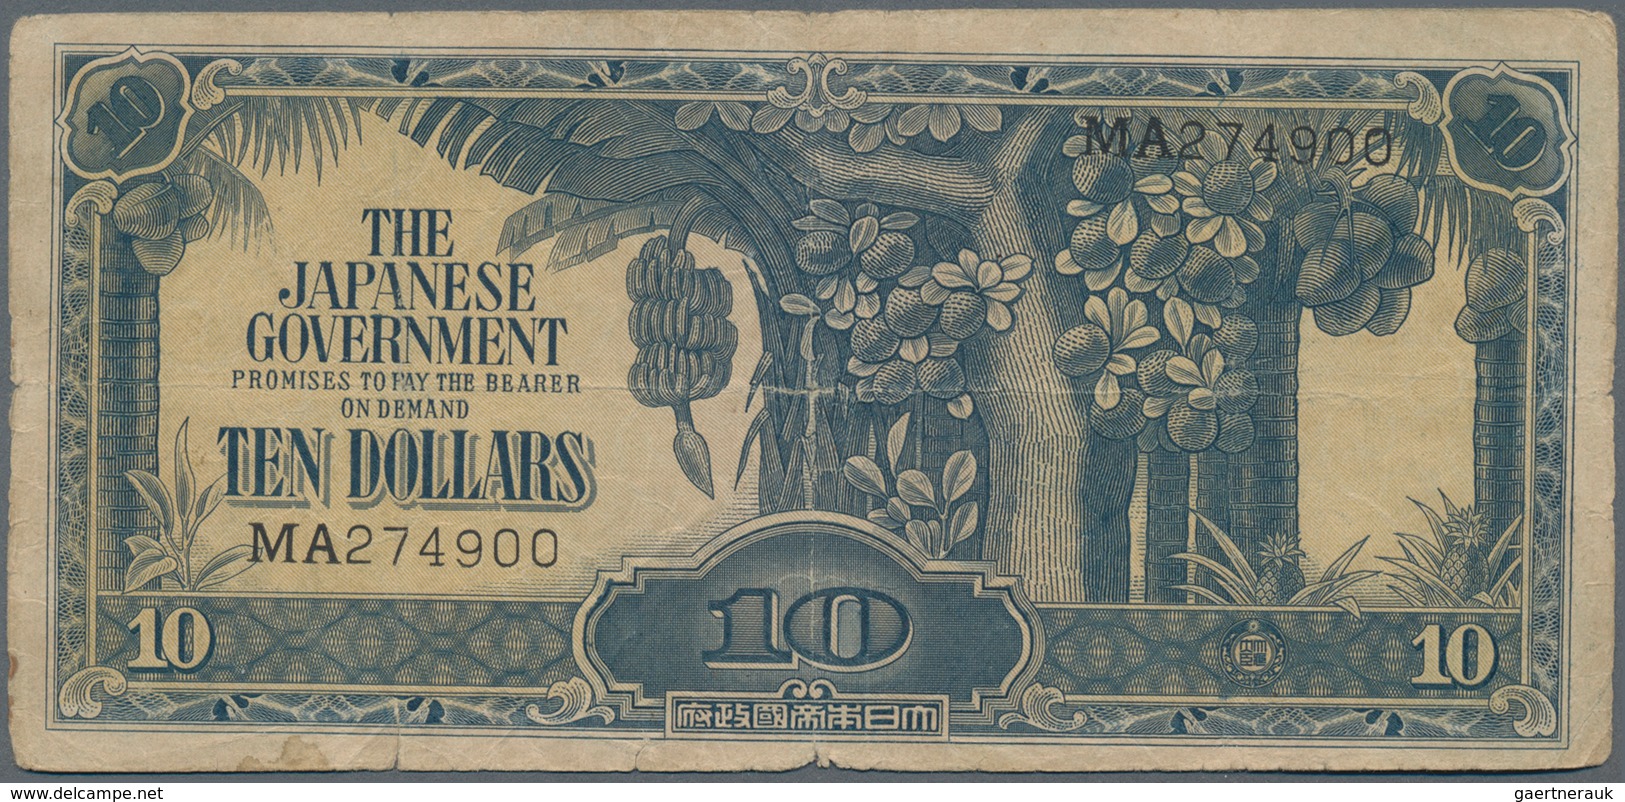 Malaya: The Japanese Government set with 4 banknotes 10 Dollars ND(1942-44), P.M7a in F-/F condition